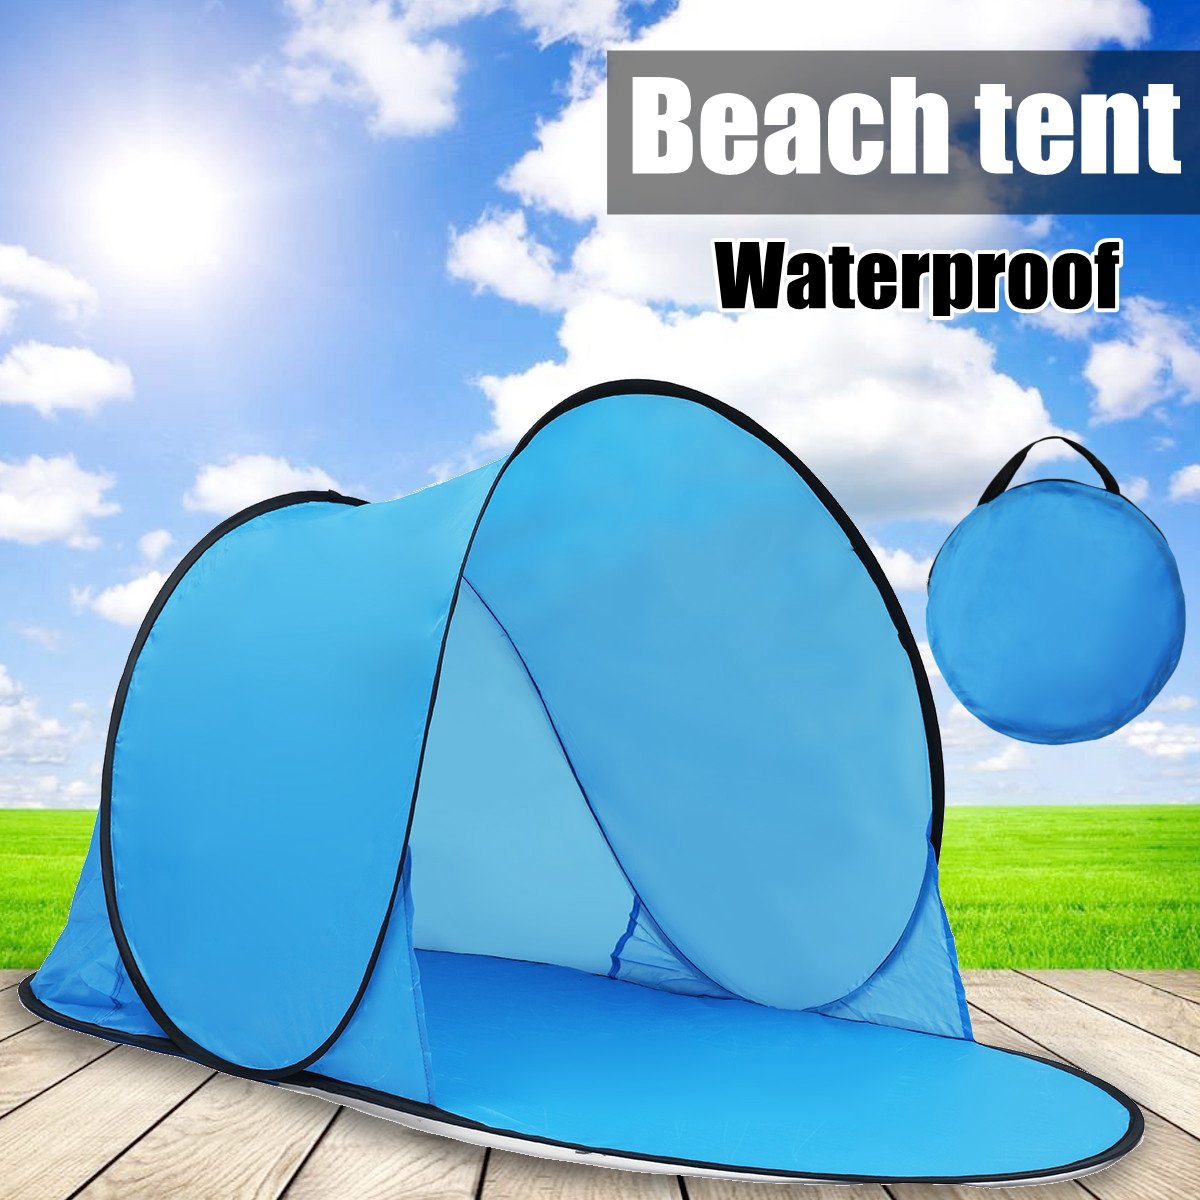 Portable Outdoor Waterproof Camping Beach Picnic Tent Pop Up Open Camping Tent Fishing Hiking Automatic Instant Blue